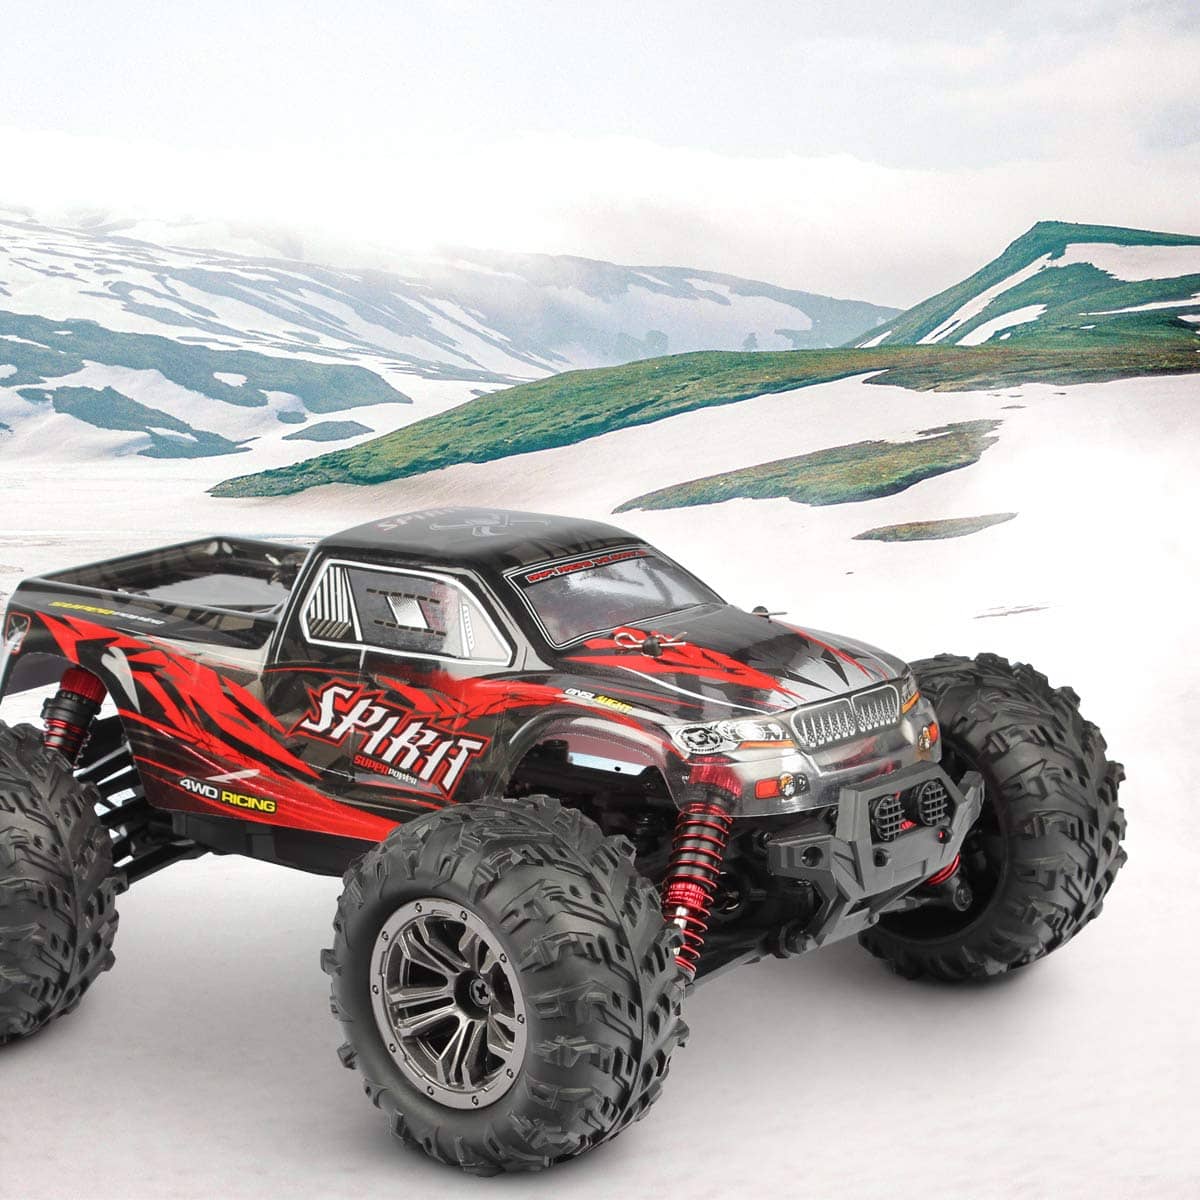 Hosim 1:16 Scale RC Car Monster Truck High Speed Off-Road 9135 Red